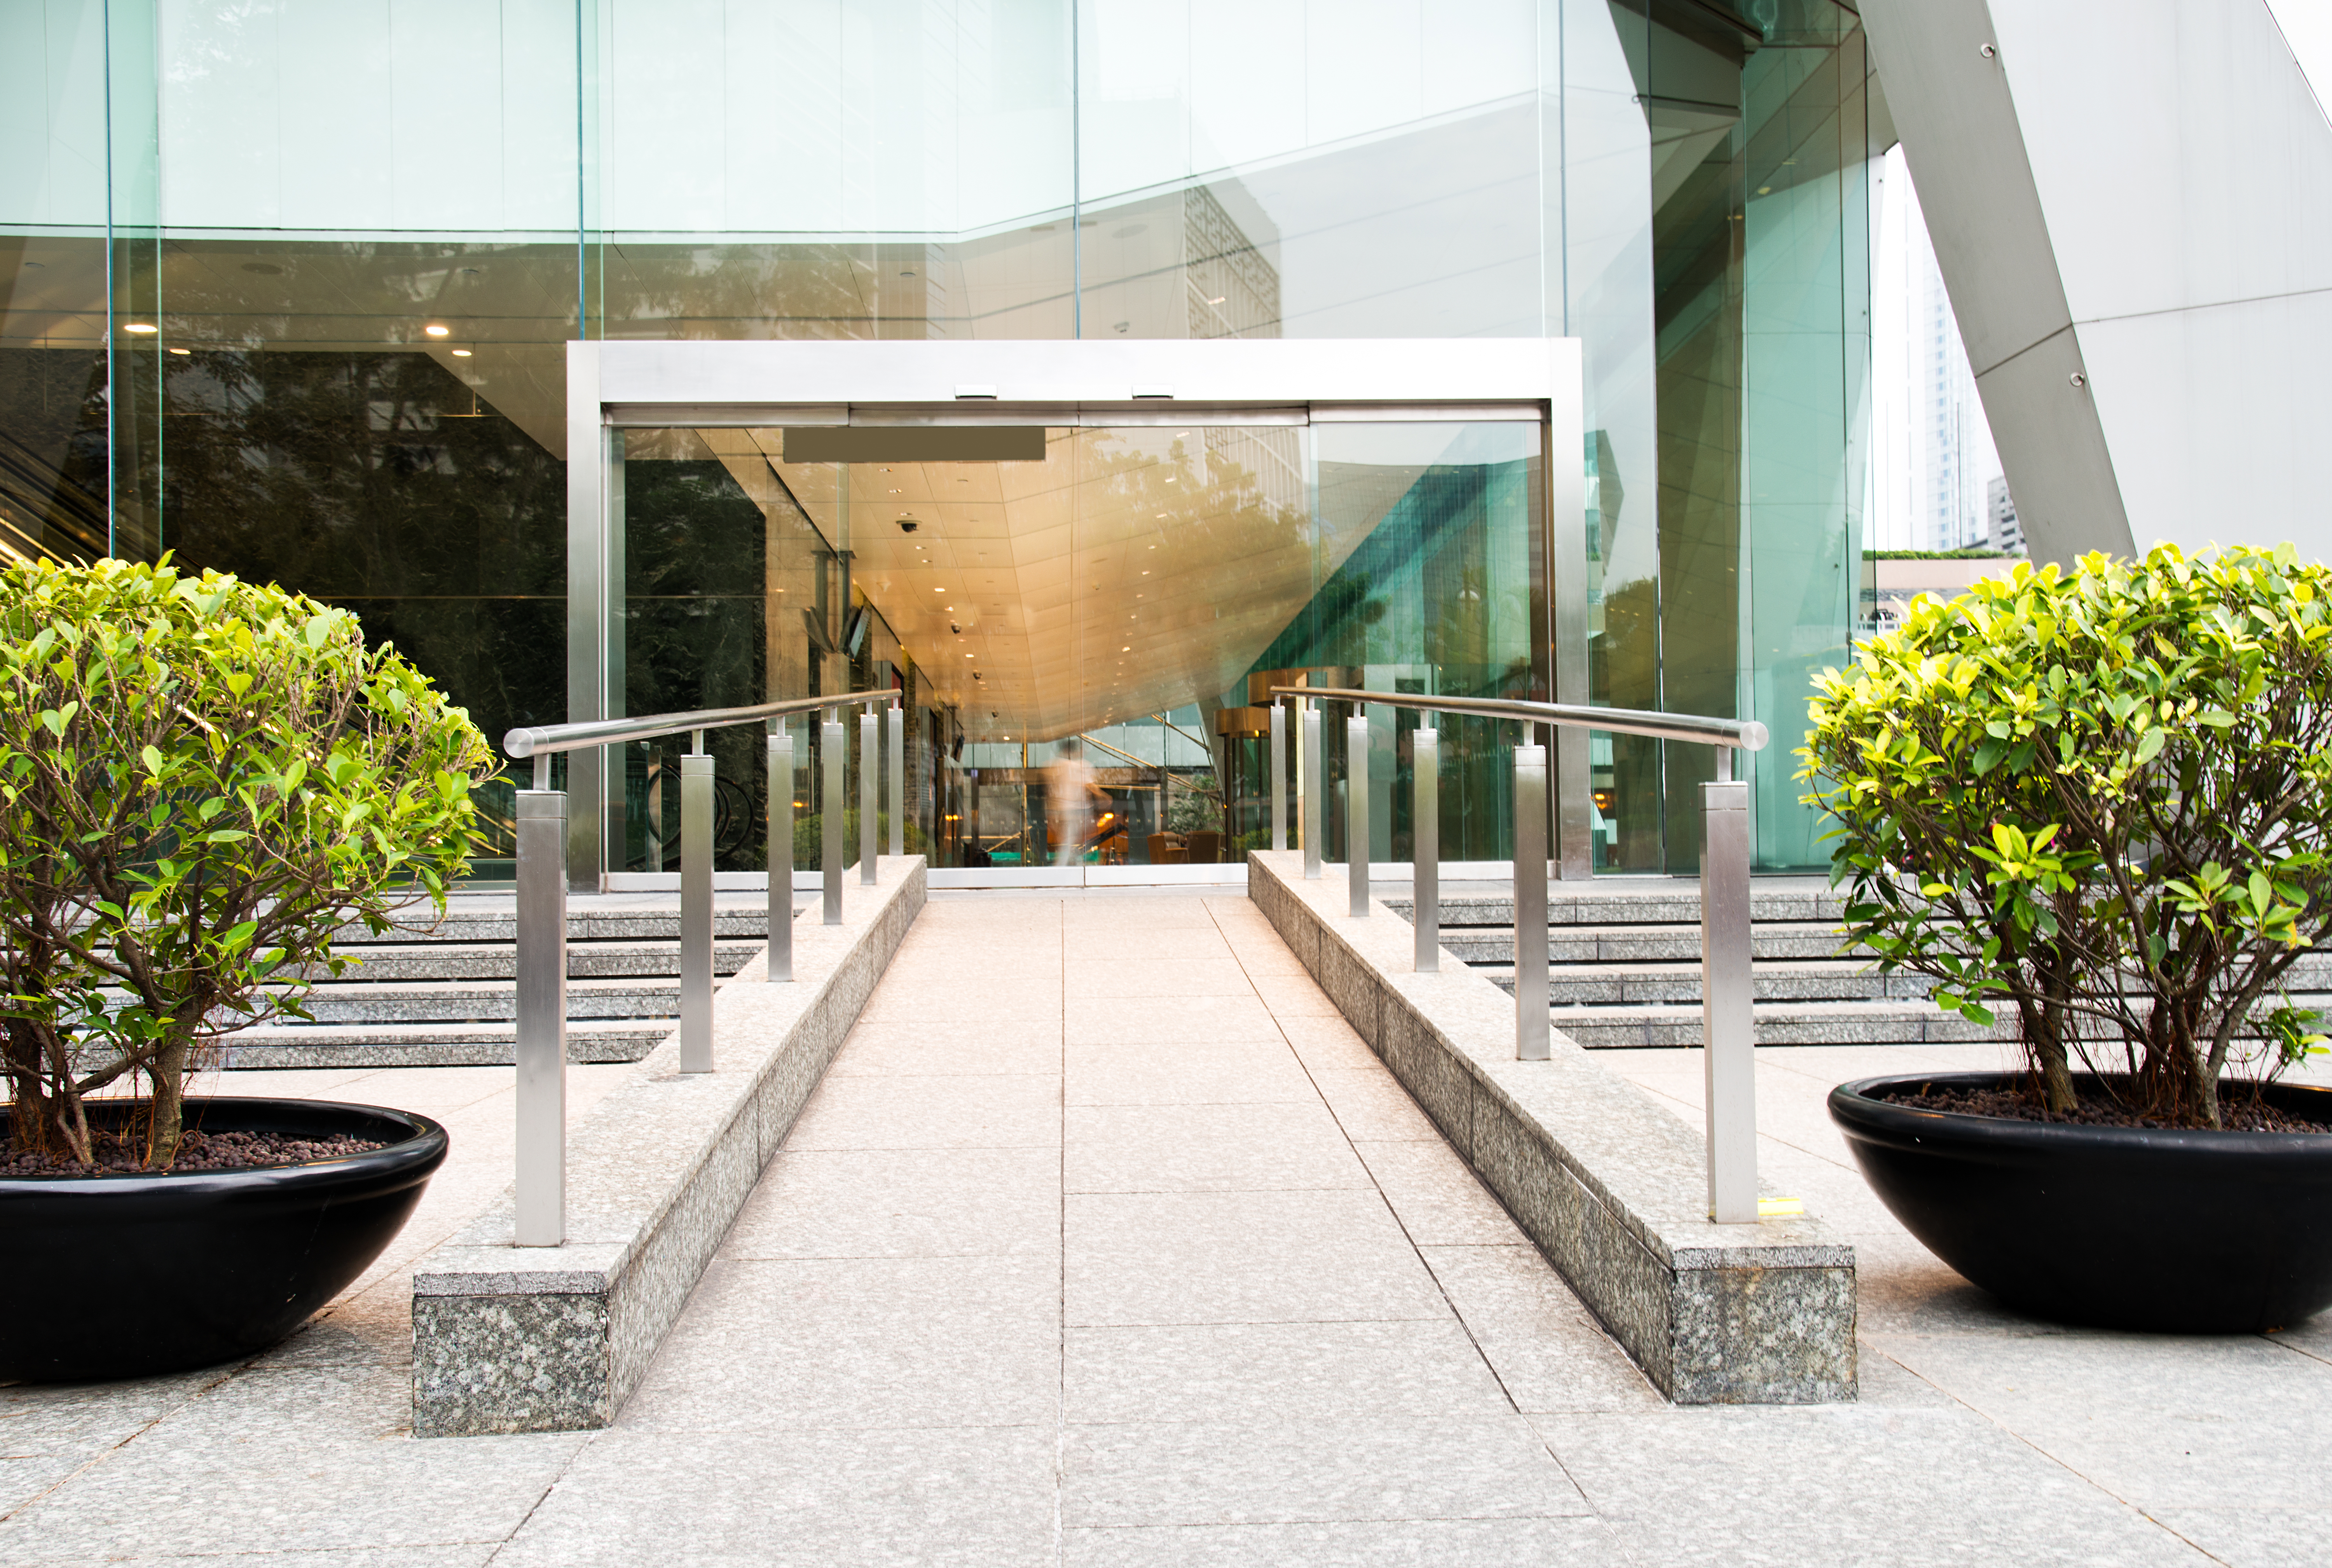 How to Choose the Best Commercial Outdoor Planters